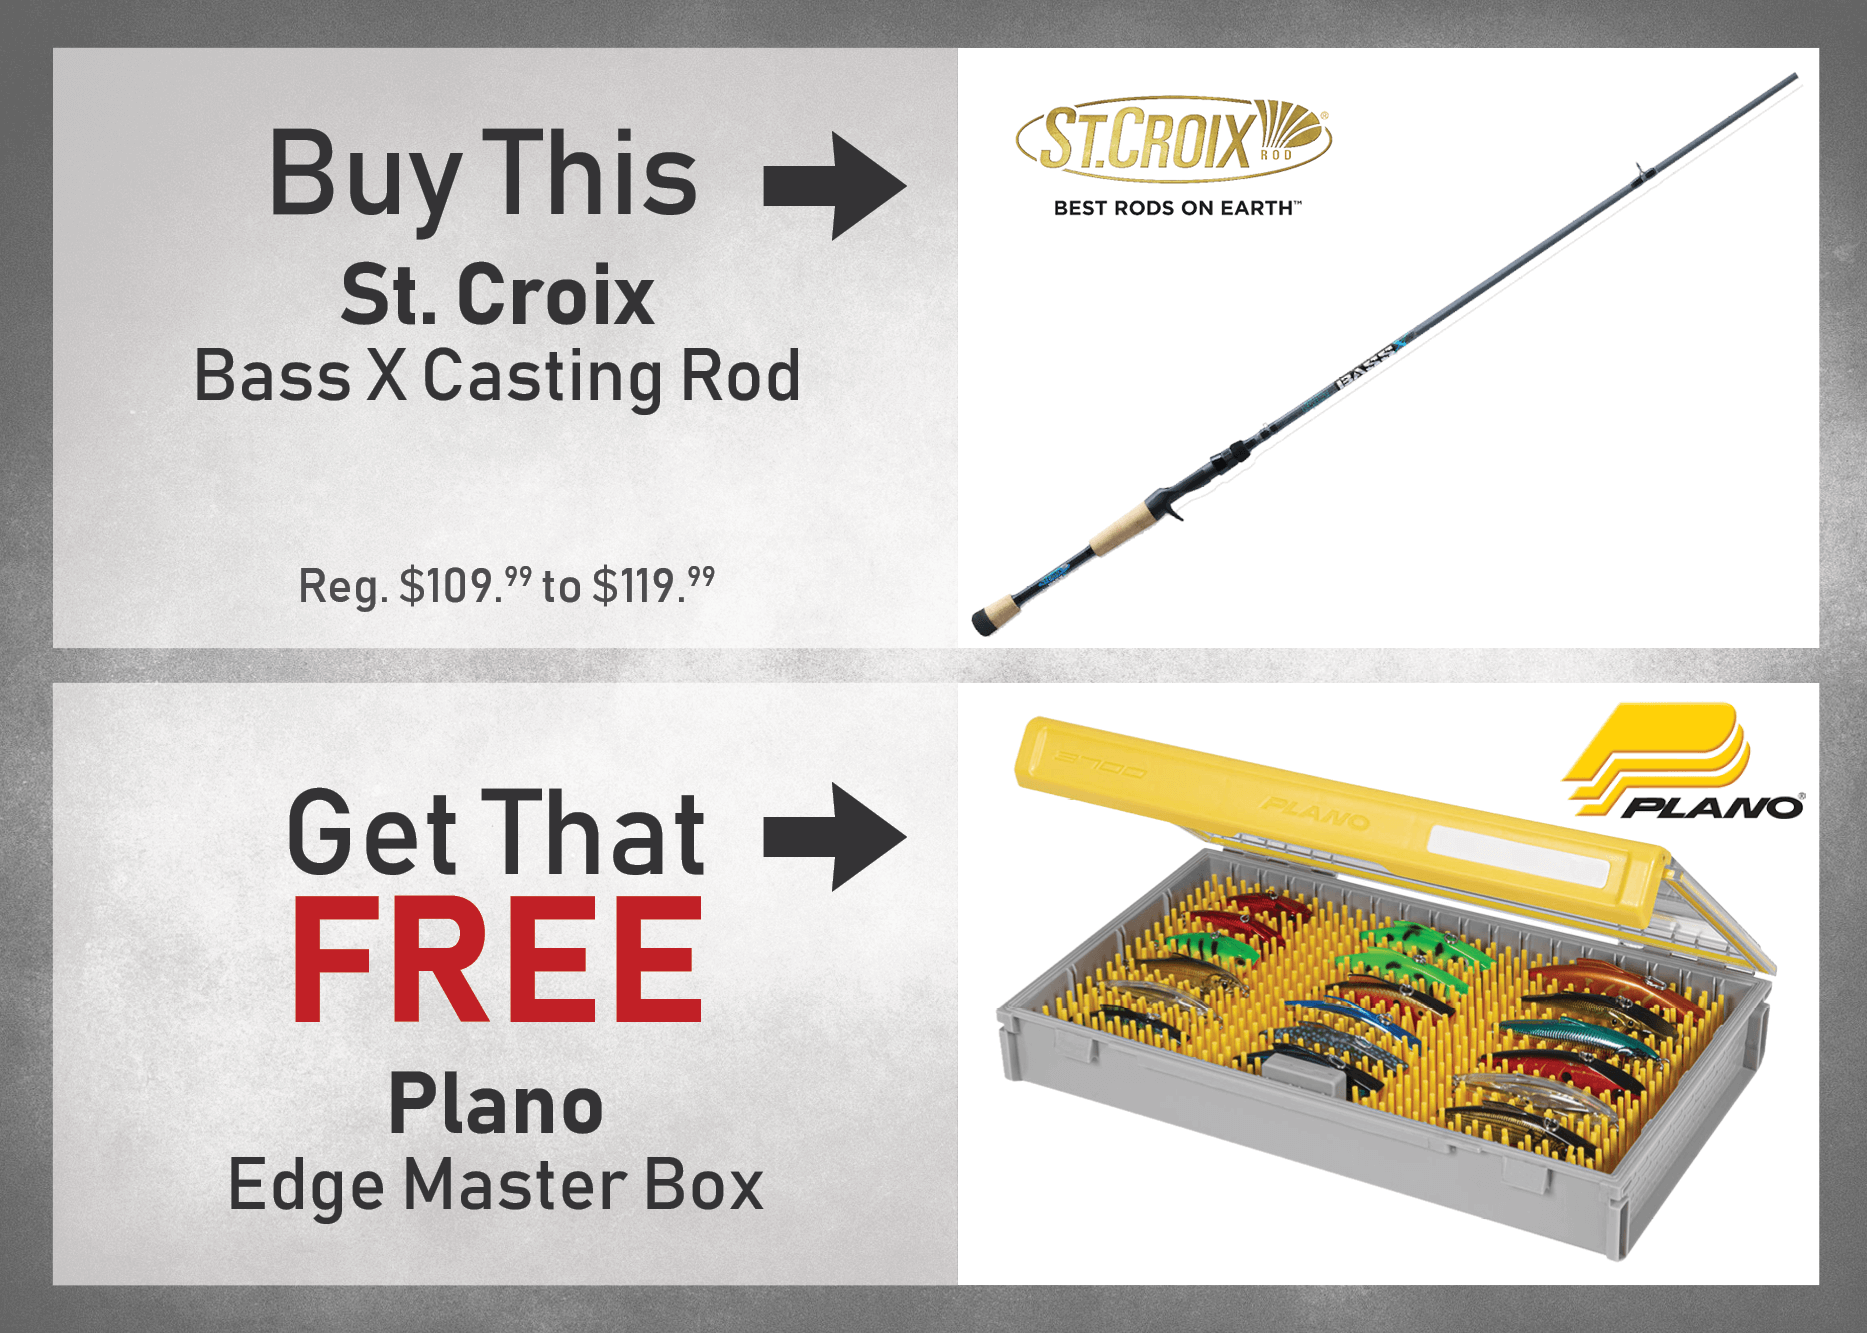 BUY a St. Croix Bass X Casting Rod & GET a FREE Plano Edge Master Box!